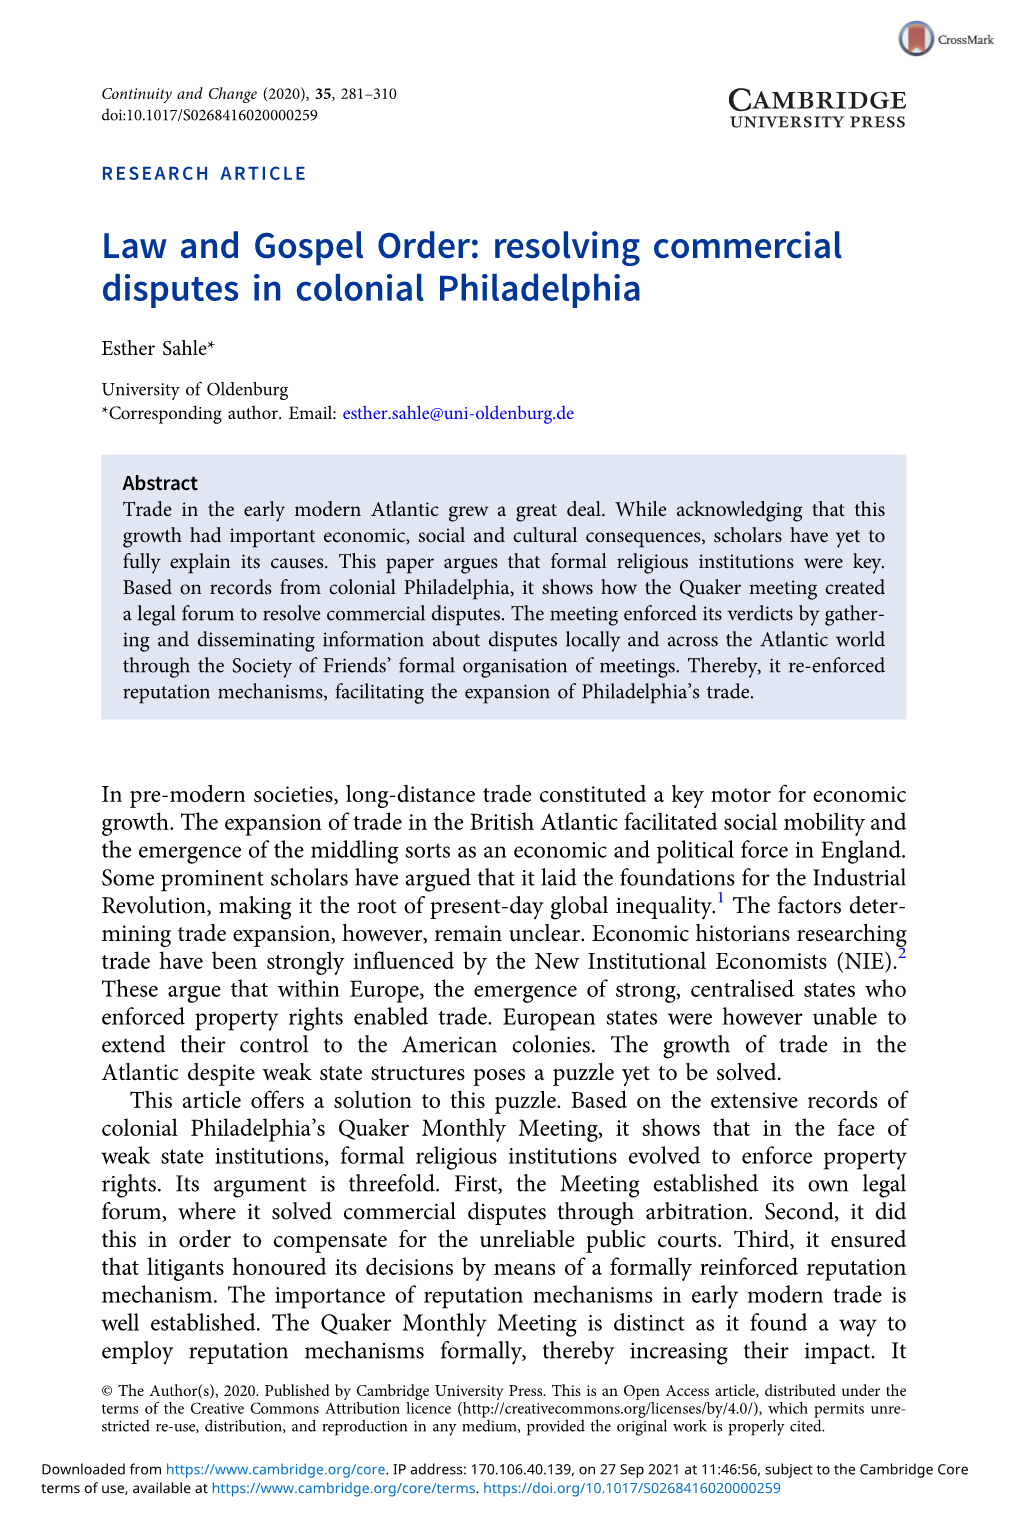 Resolving Commercial Disputes in Colonial Philadelphia